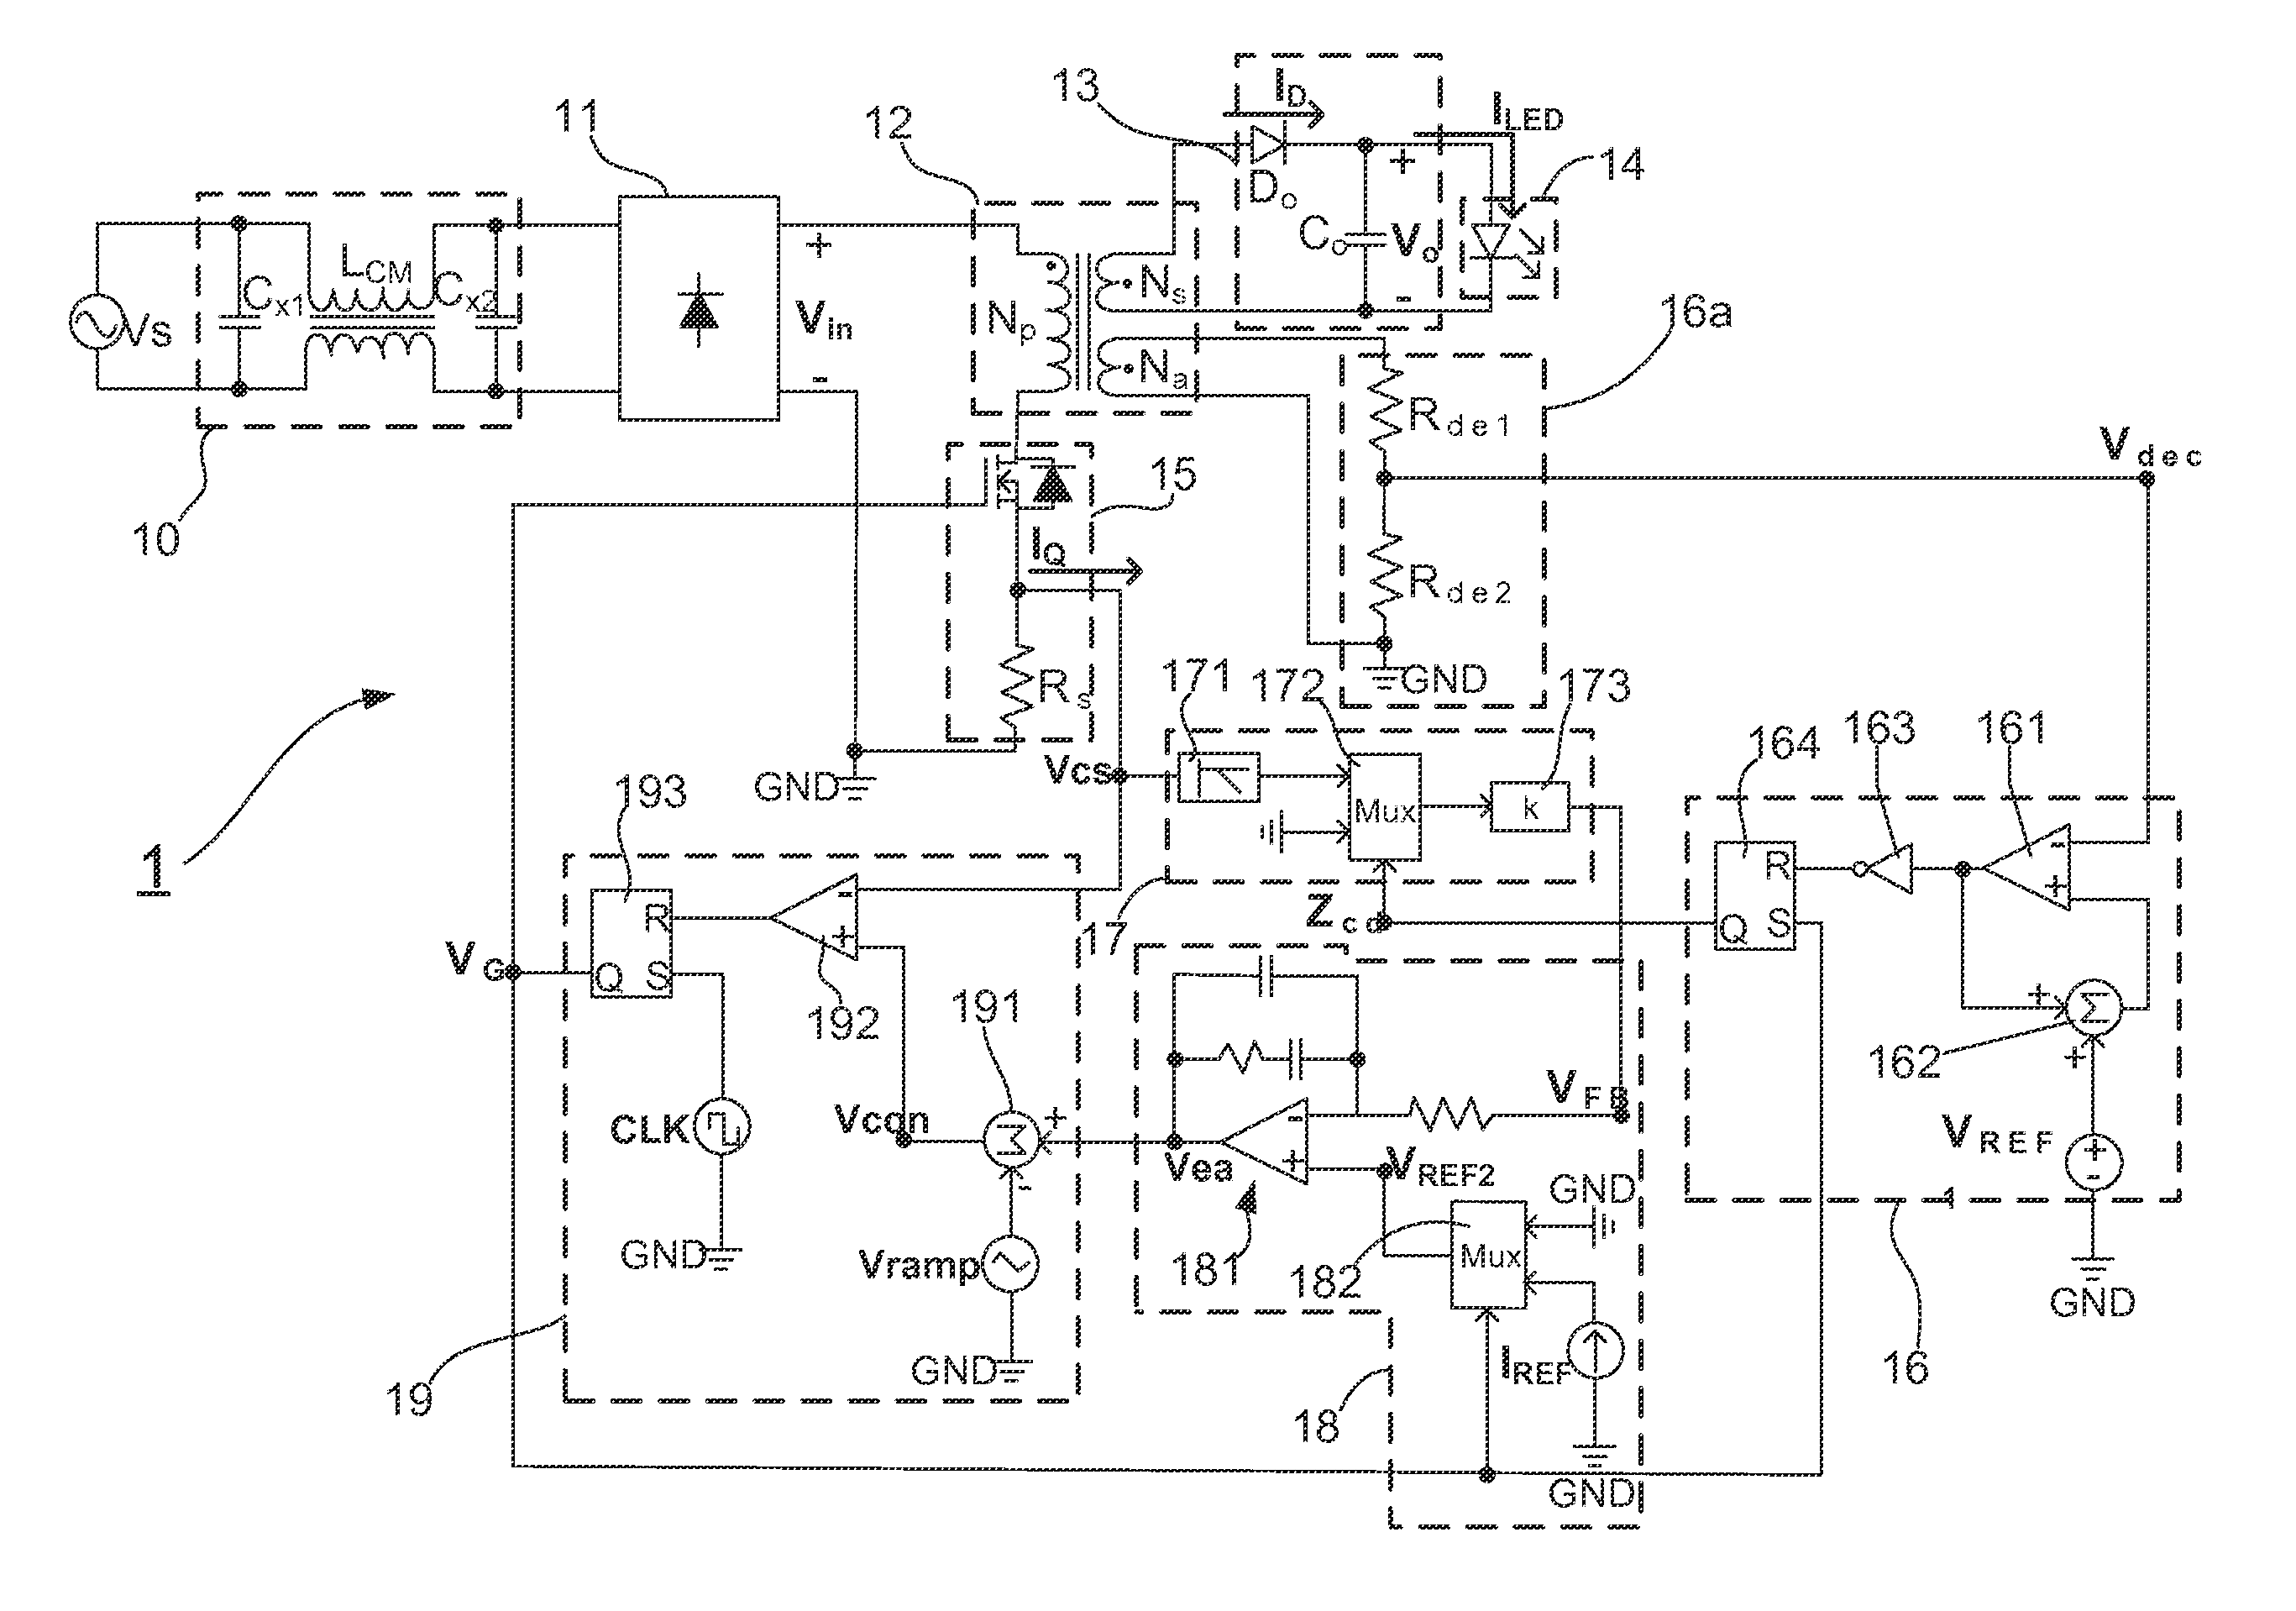 LED luminaire driving circuit with high power factor